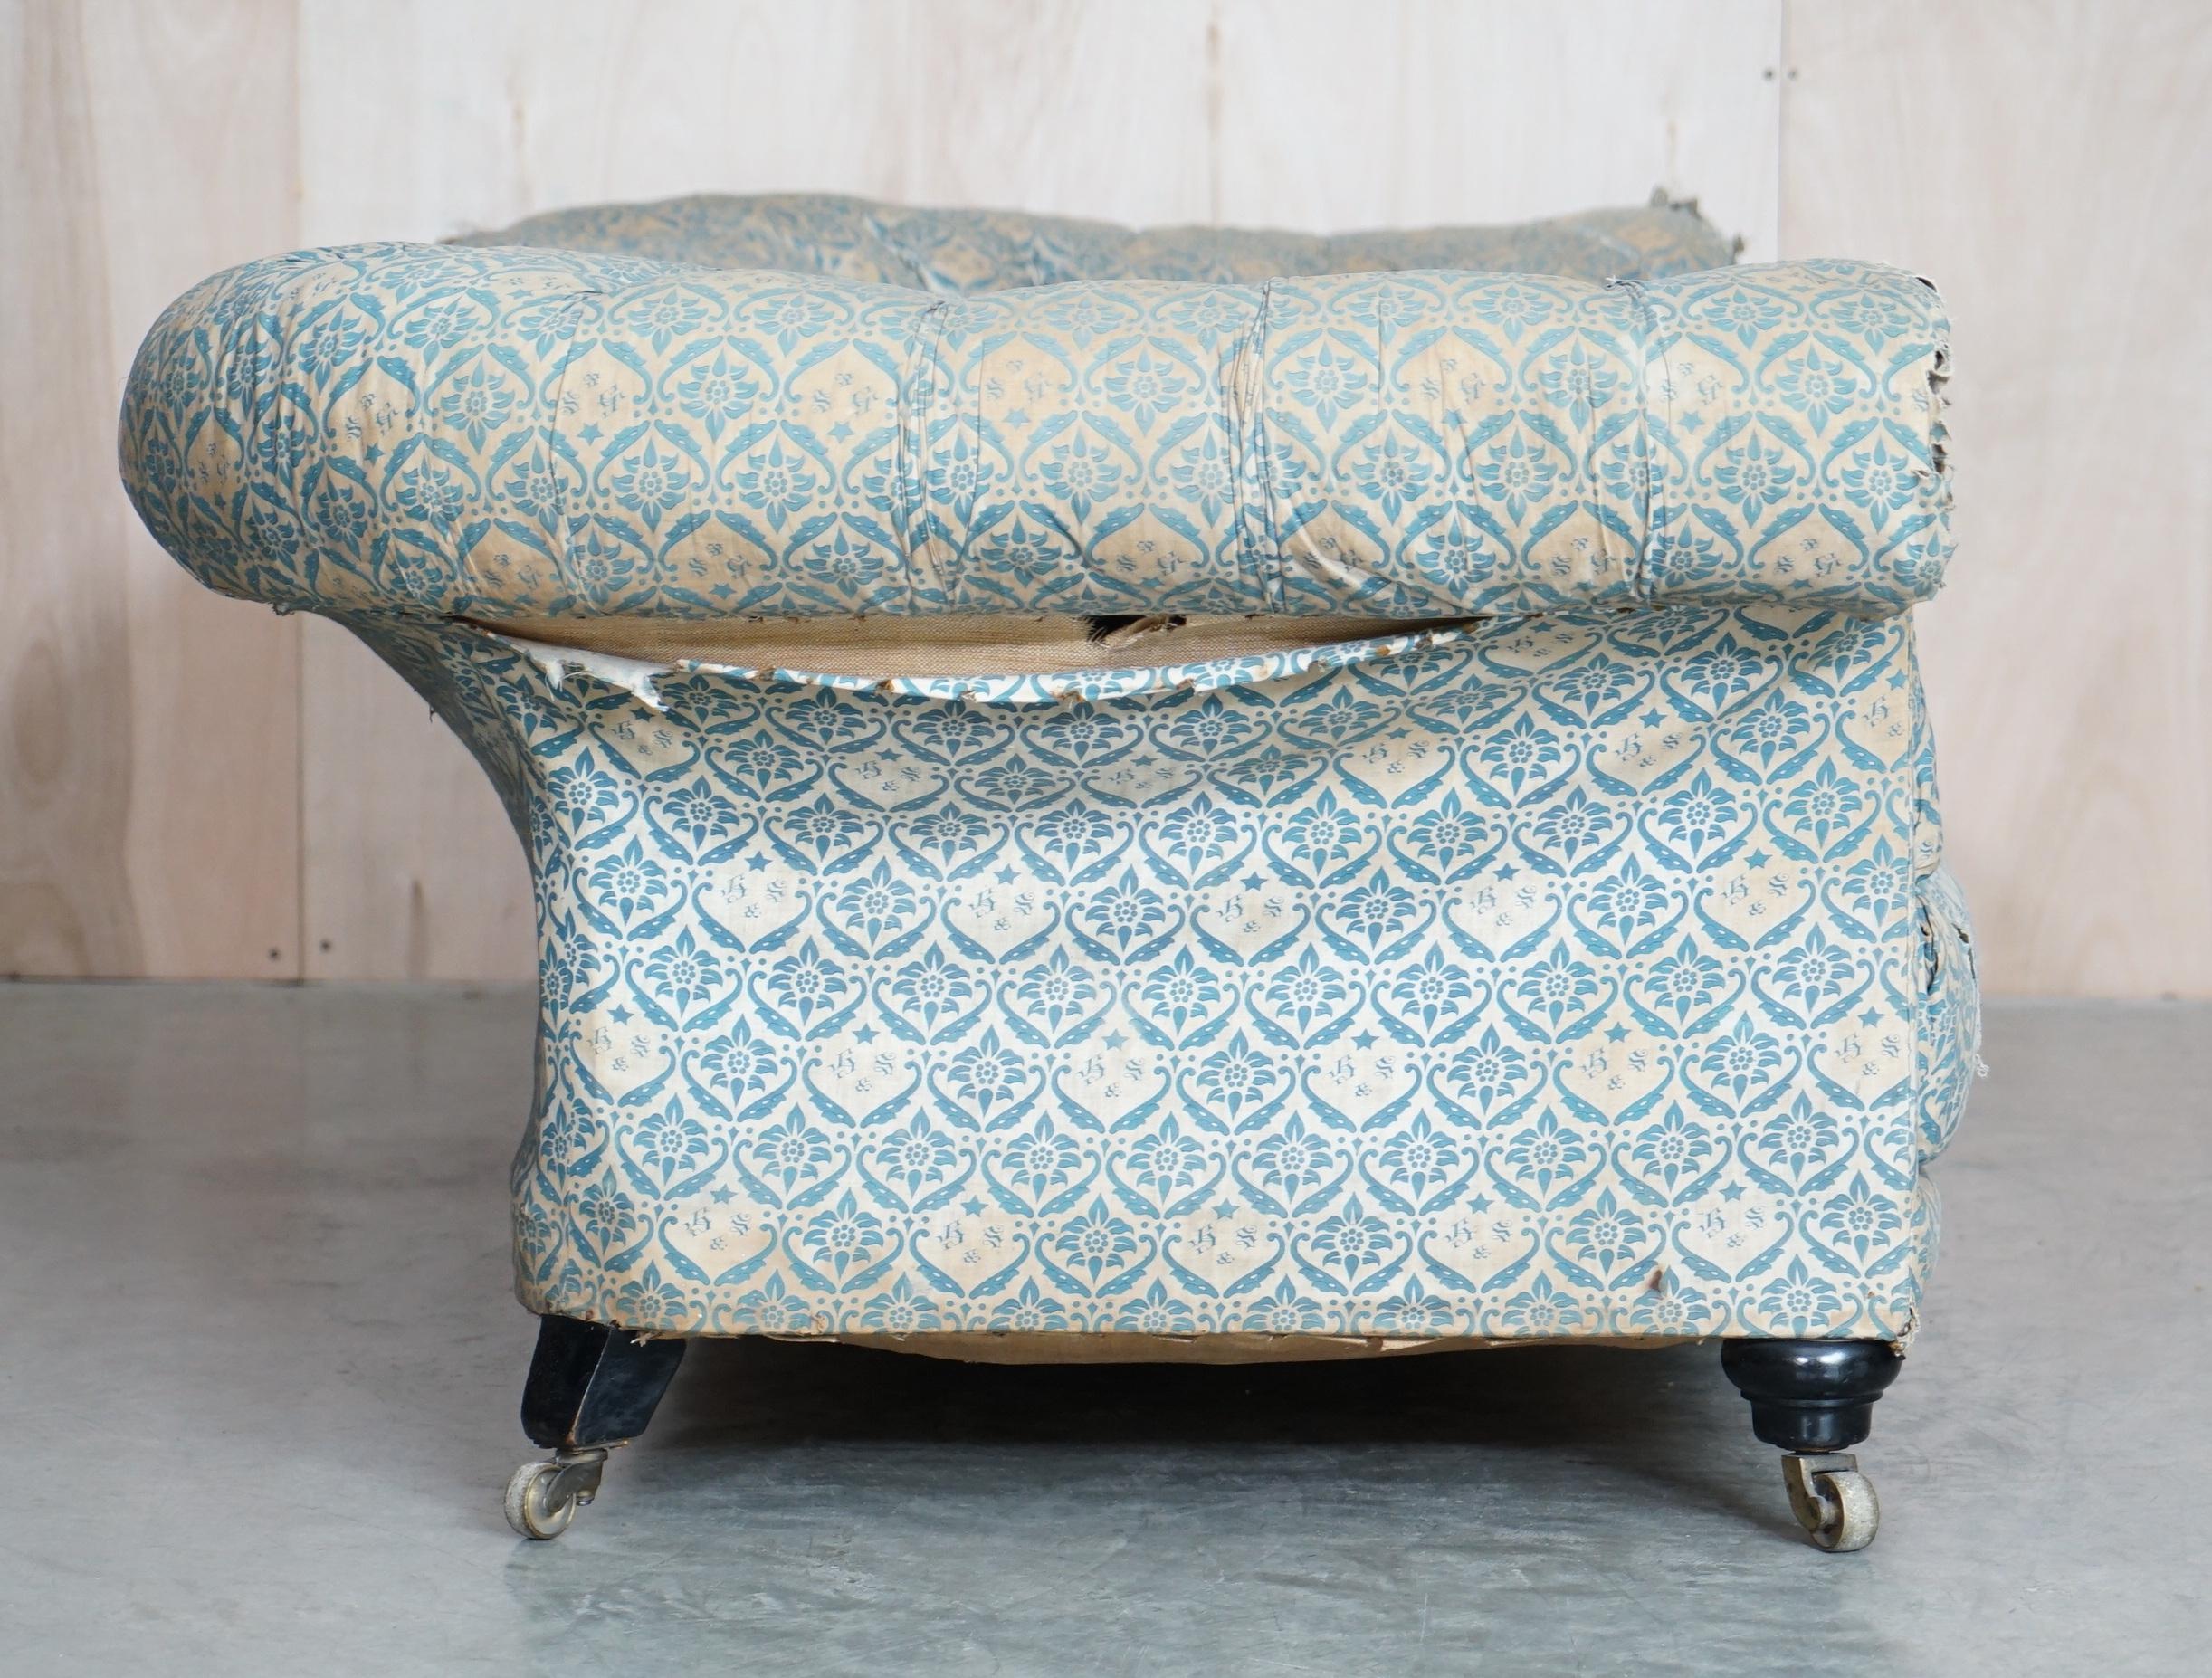 Unrestored Antique Victorian Howard & Son's Chesterfield Sofa Inc Ticking Fabric For Sale 9